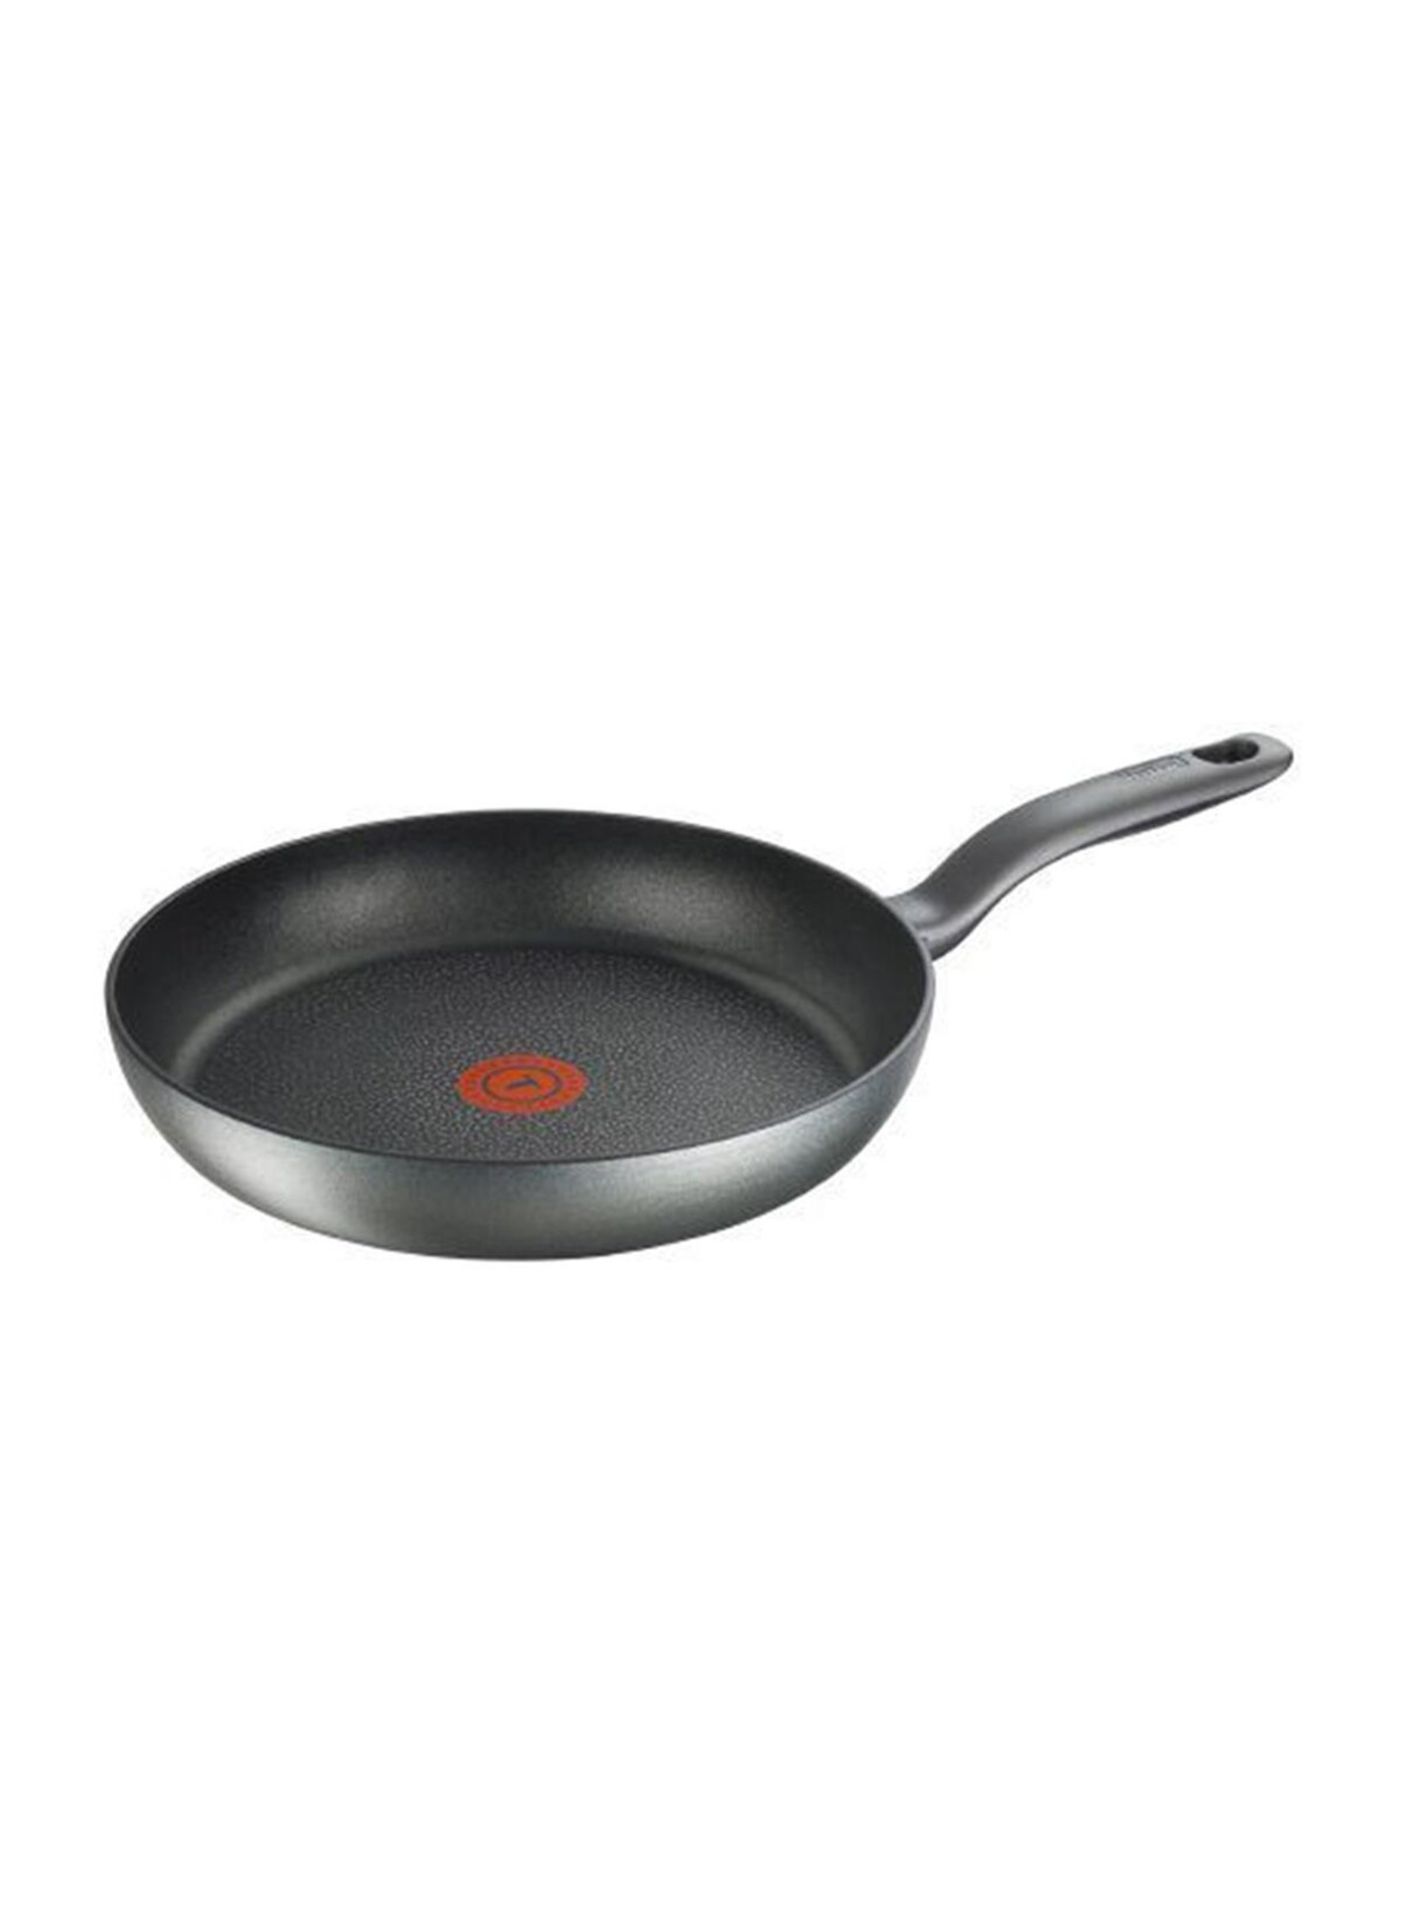 V Brand New Tefal Hard Titanium 26cm Frypan Suitable For All Hob Types Including Induction ISP 27.